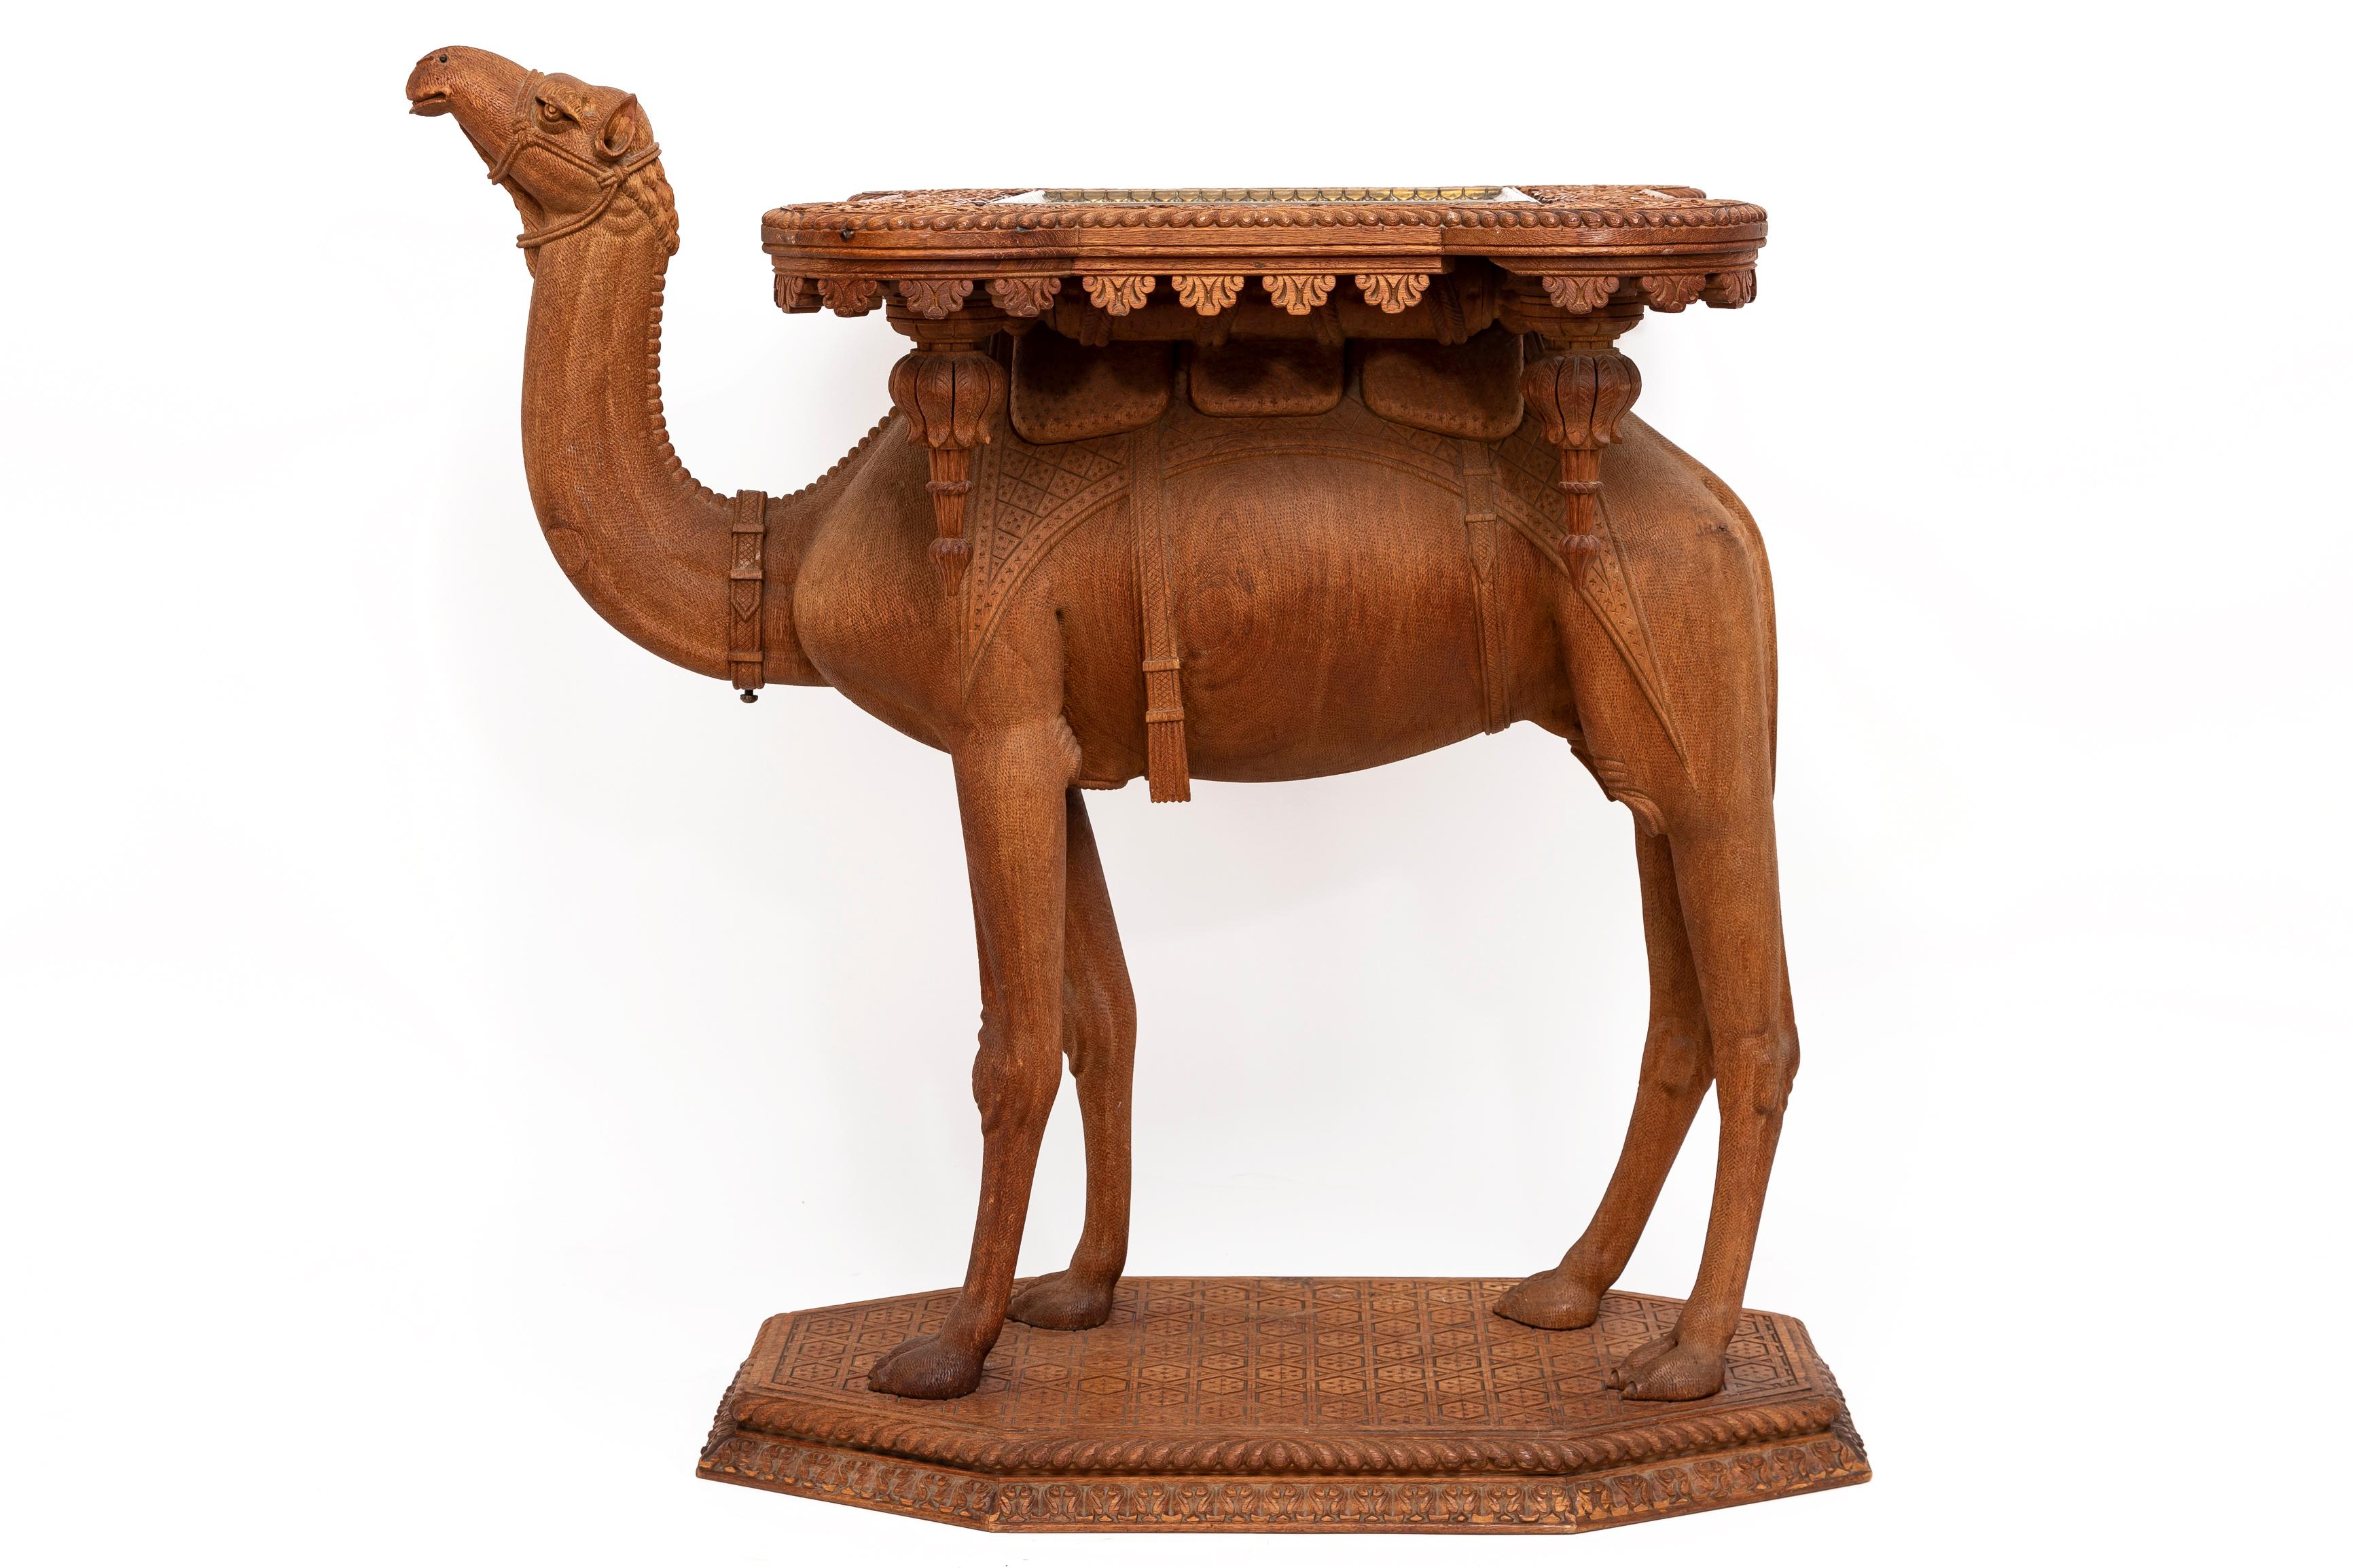 A Marvelous and Quite Impressive French Orientalist Hand-Carved and Hand-Tooled Camel Form Table with a Square Gilt Bronze Top, Attributed to Jansen. This camel table is a testament to the exquisite craftsmanship of orientalist furniture, showcasing